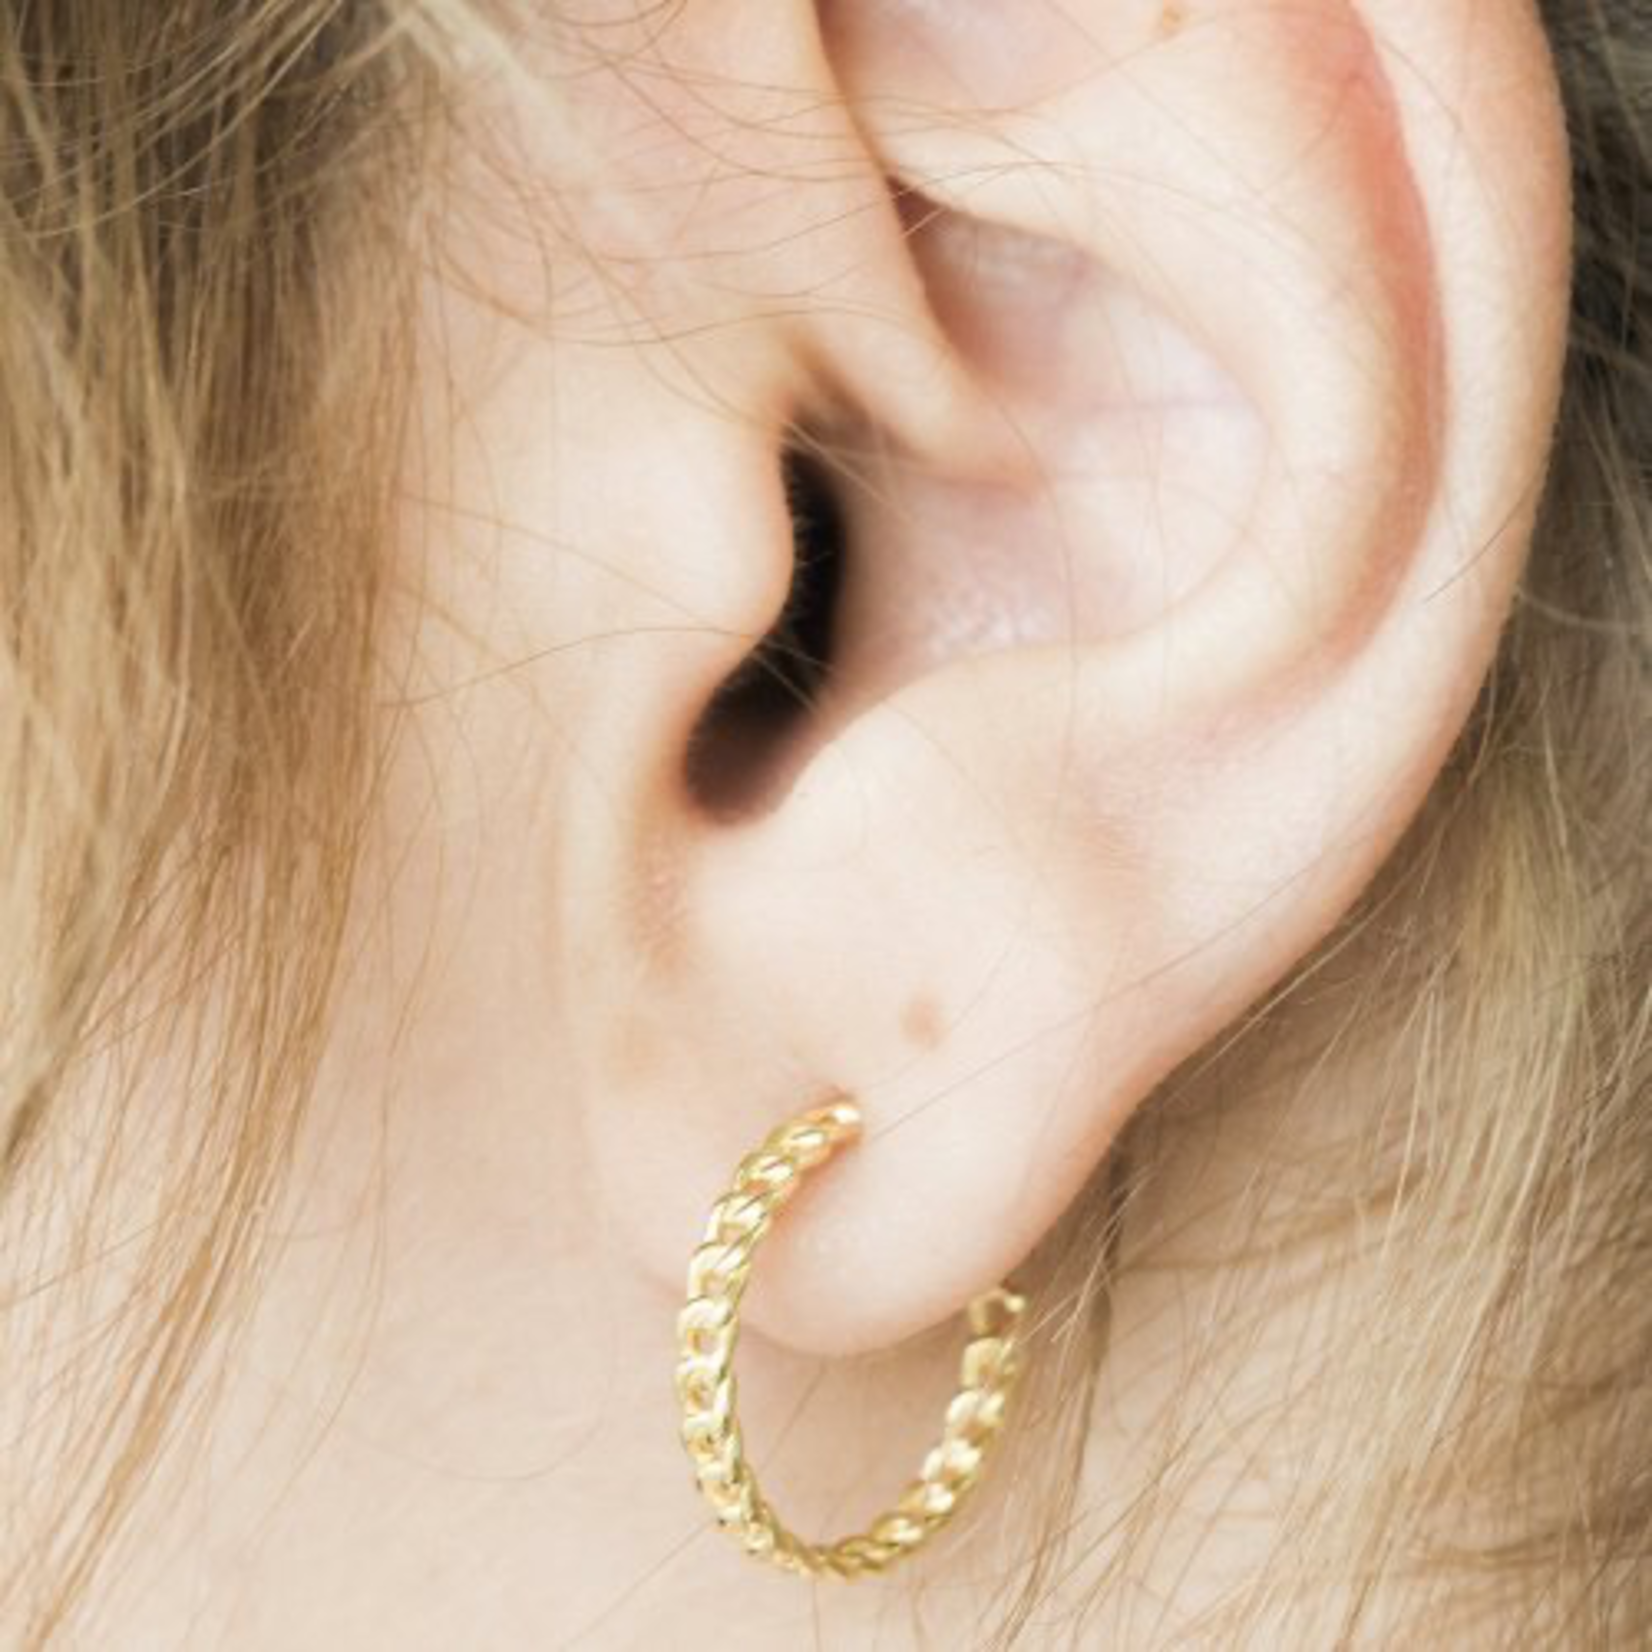 Sterling Silver Gold Plated Curb Chain Hoops Earrings